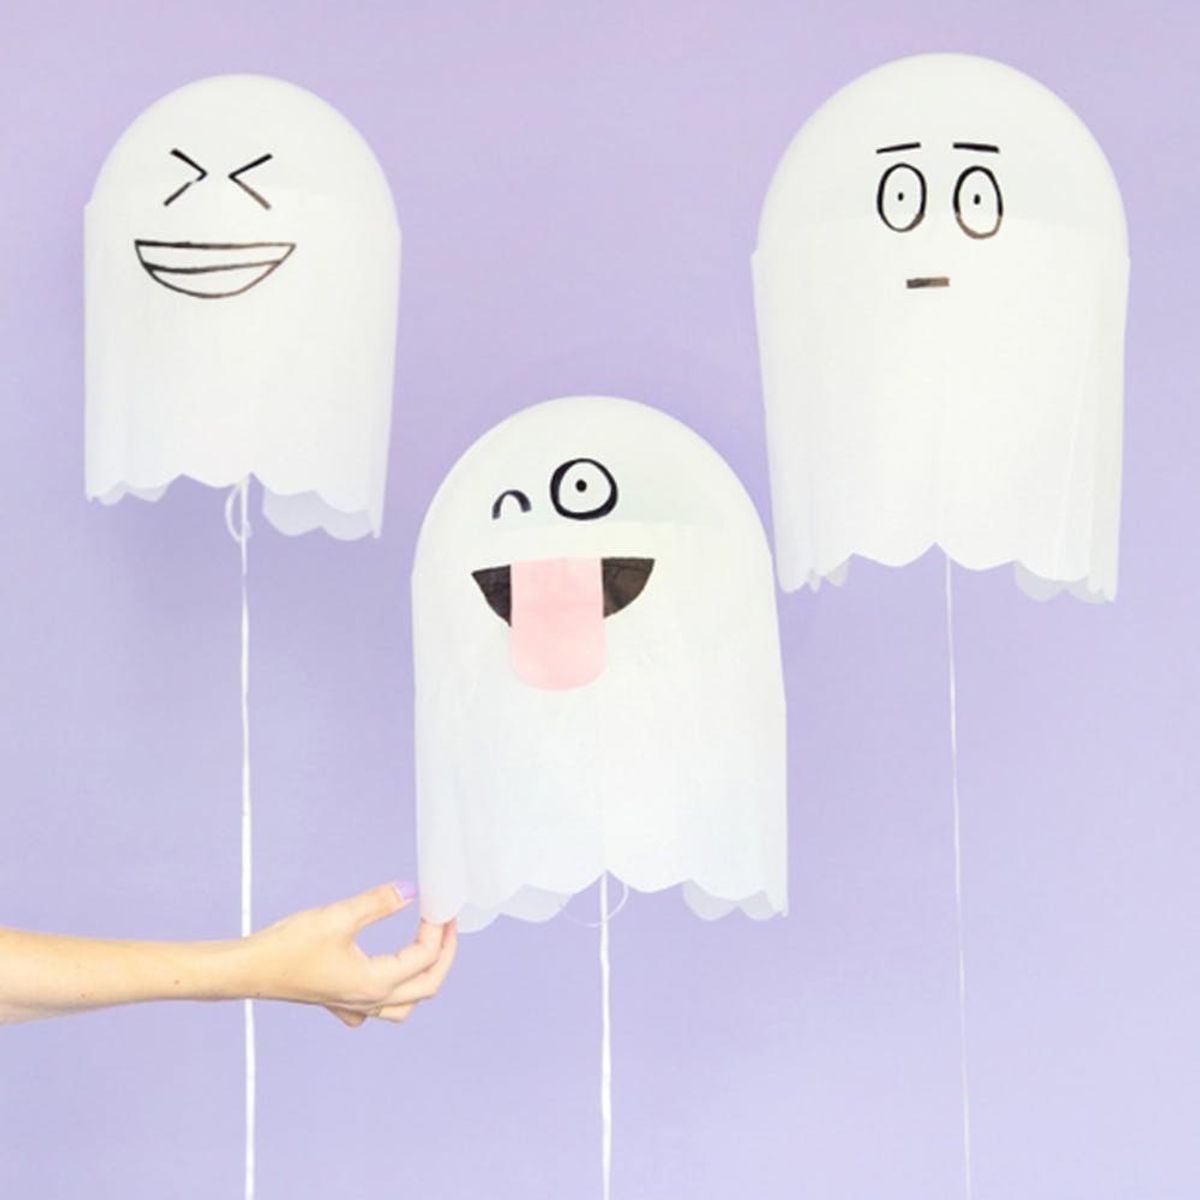 14 Last-Minute Halloween Party DIYs to Save the Day